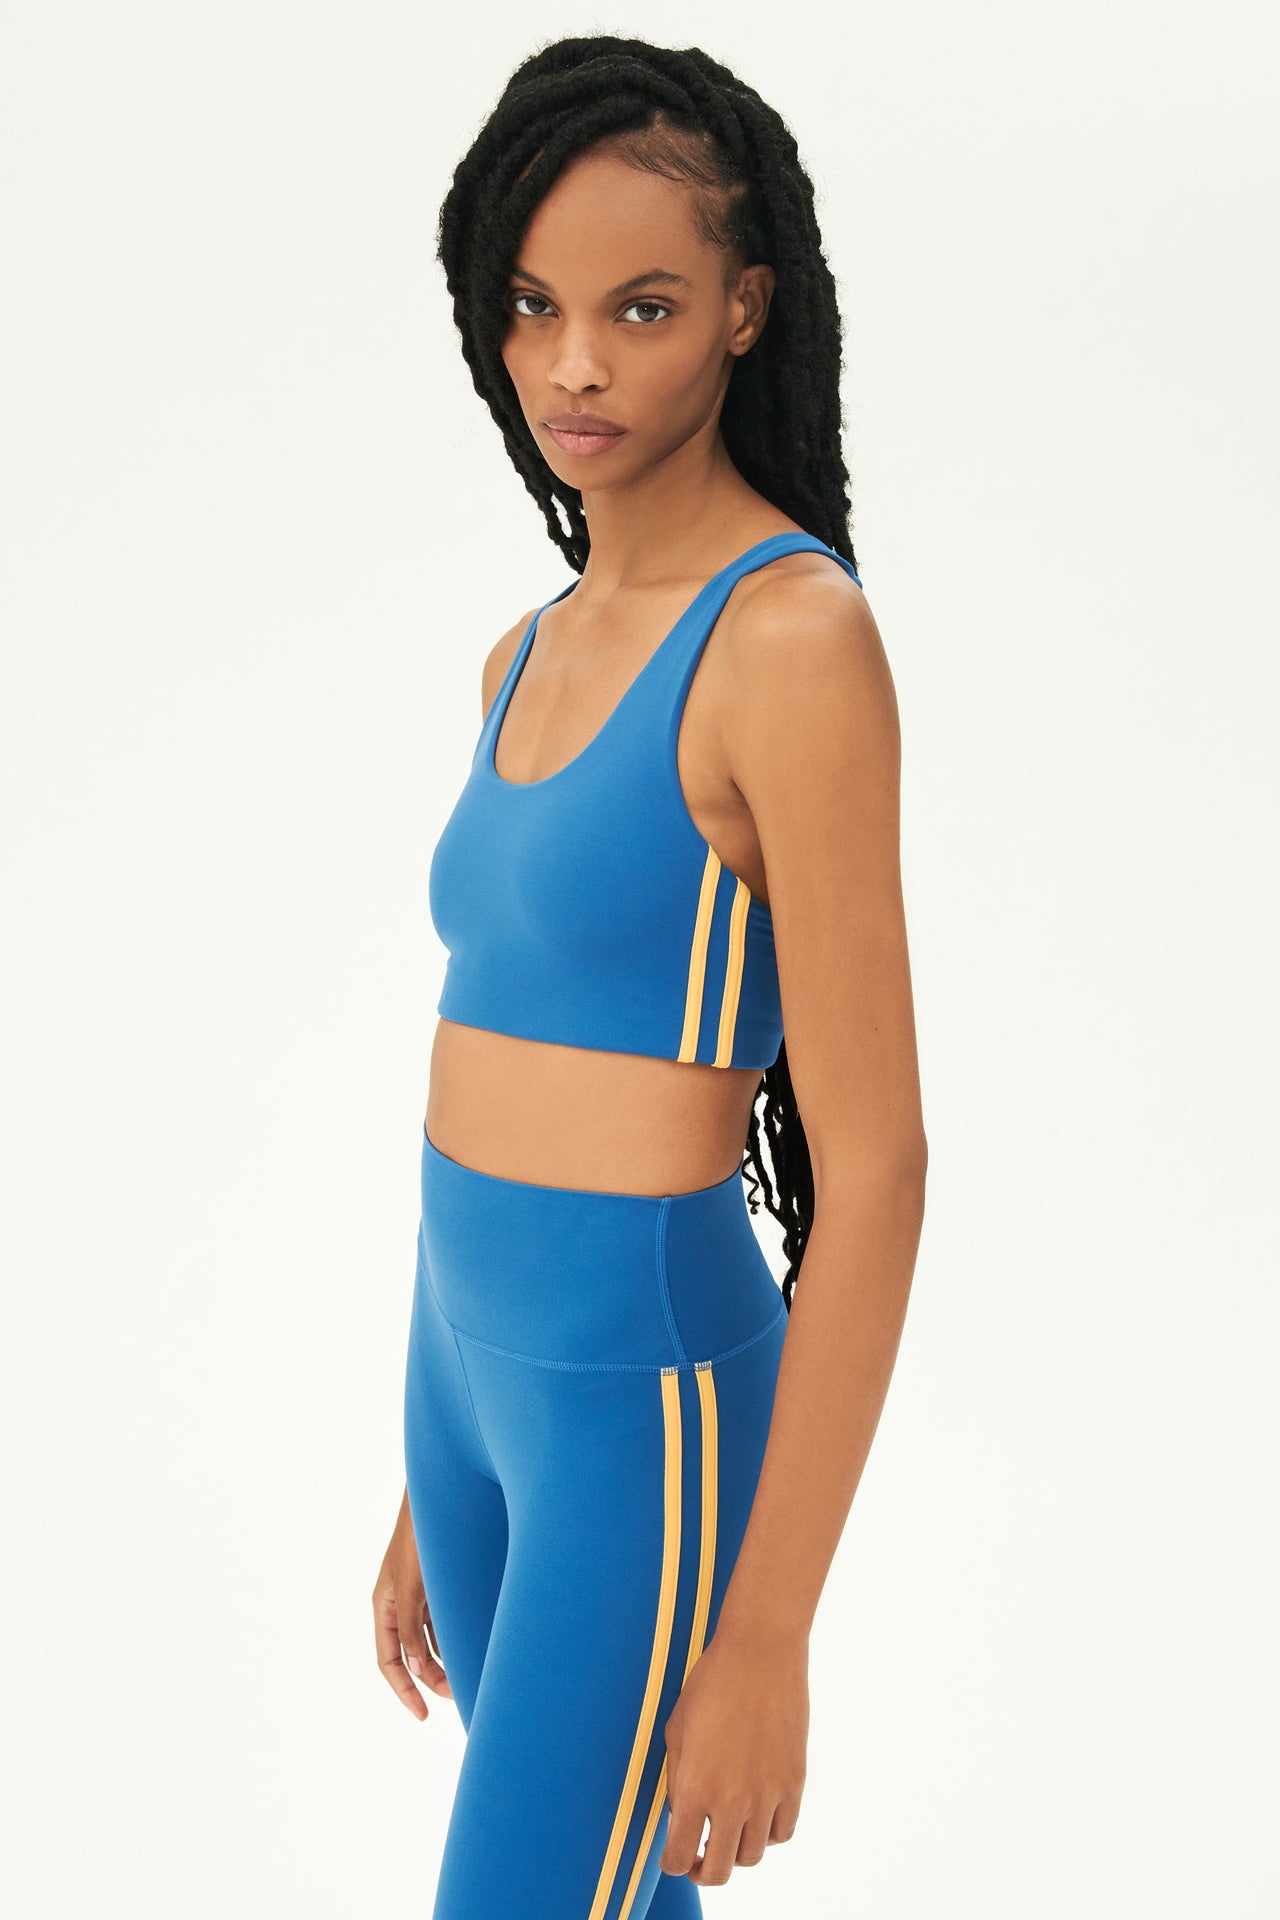 Side view of girl wearing blue sports bra with two thin yellow stripes down the side and blue leggings 